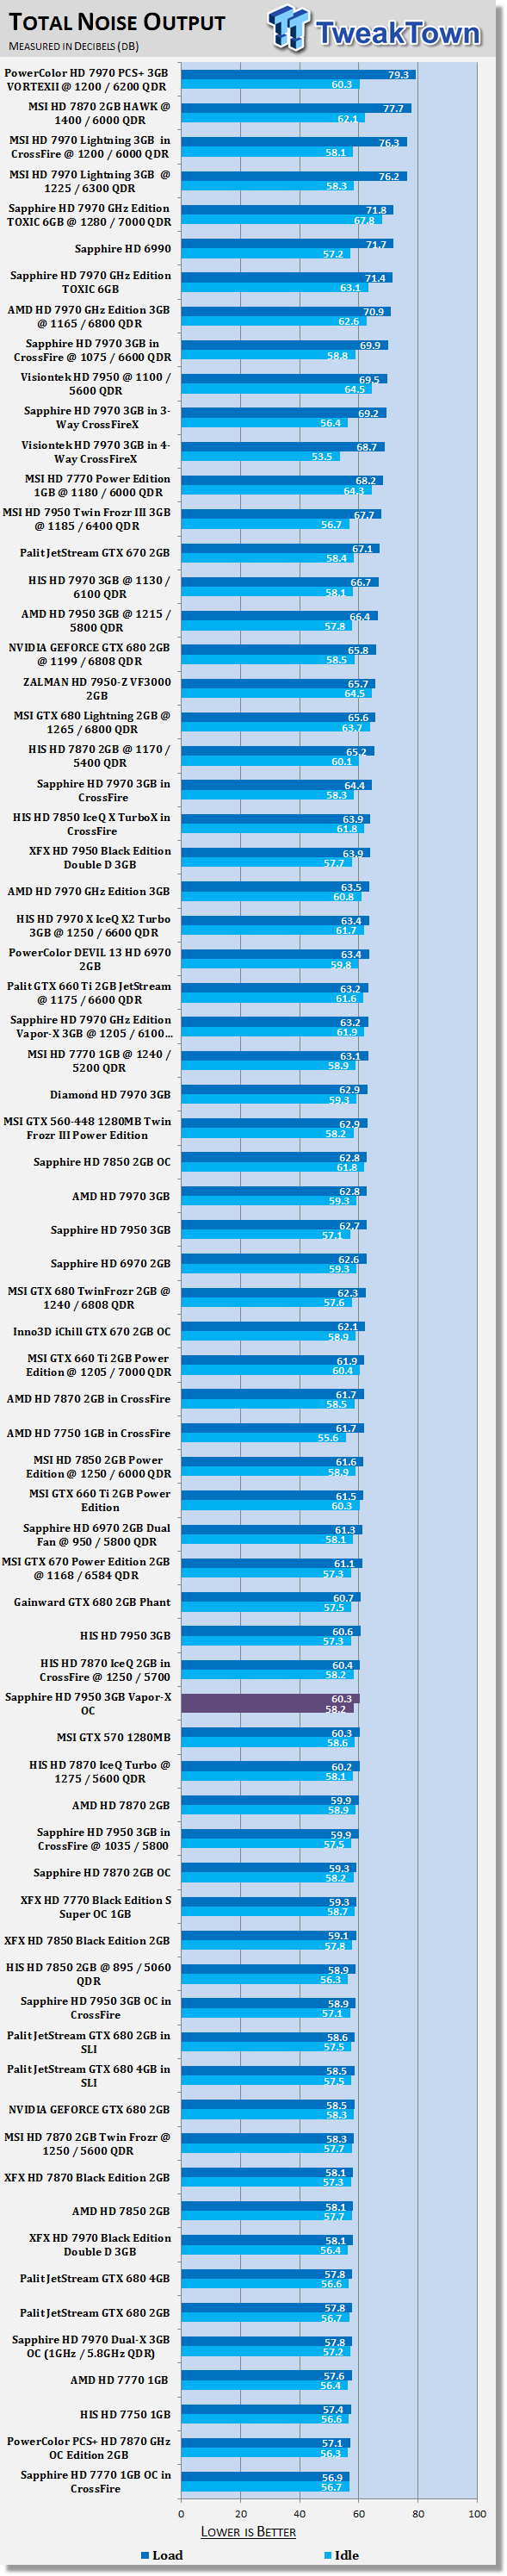 4900_41_sapphire_radeon_hd_7950_3gb_vapor_x_oc_with_boost_video_card_review.png